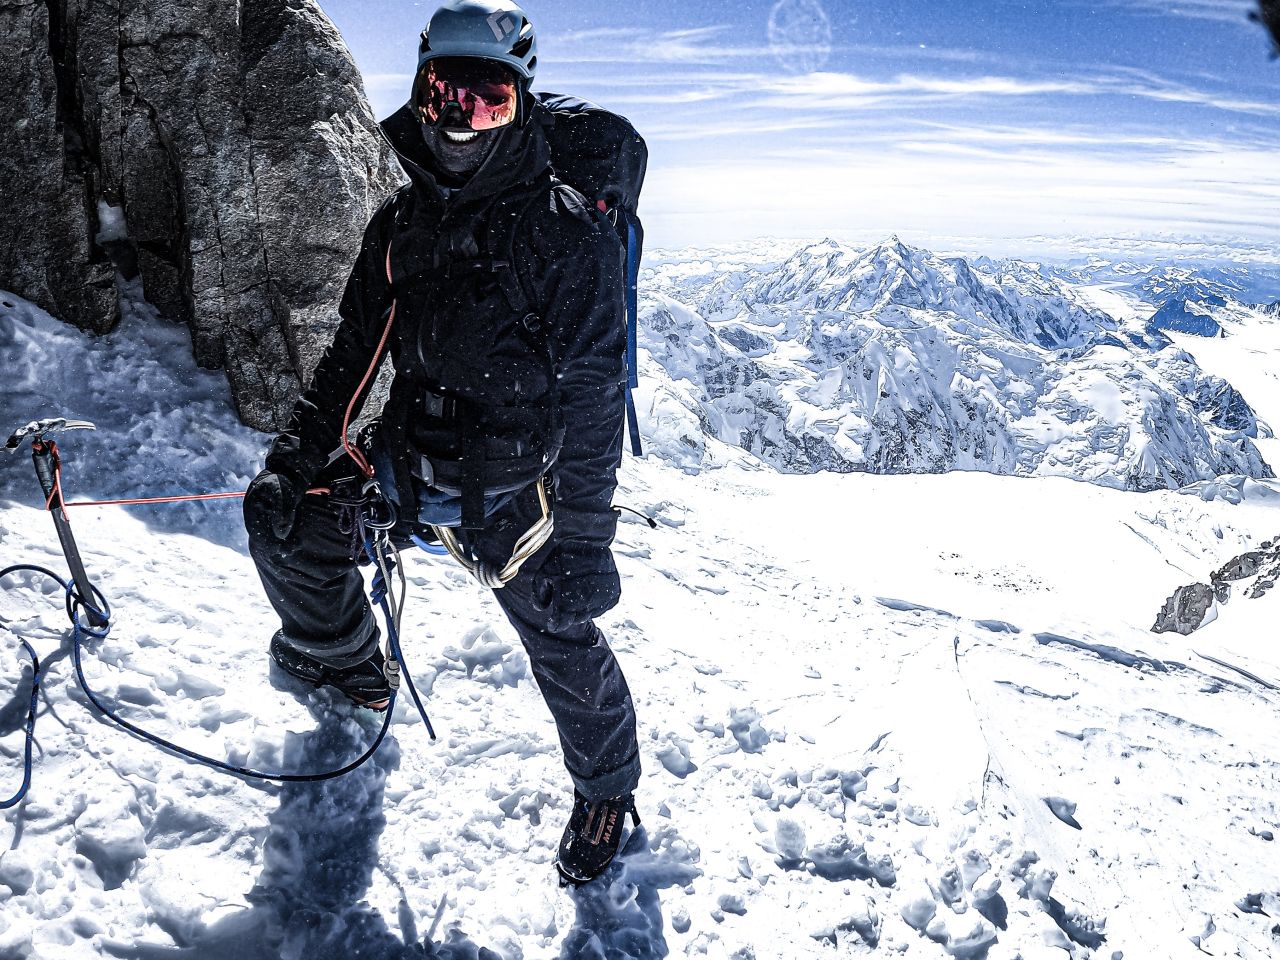 American outdoor explorer Andrew Alexander King is on a mission to not only climb the tallest peaks around the world, but also to help increase diversity on the mountaintops. He's pictured here on Denali mountain in Alaska, the highest peak in North America.